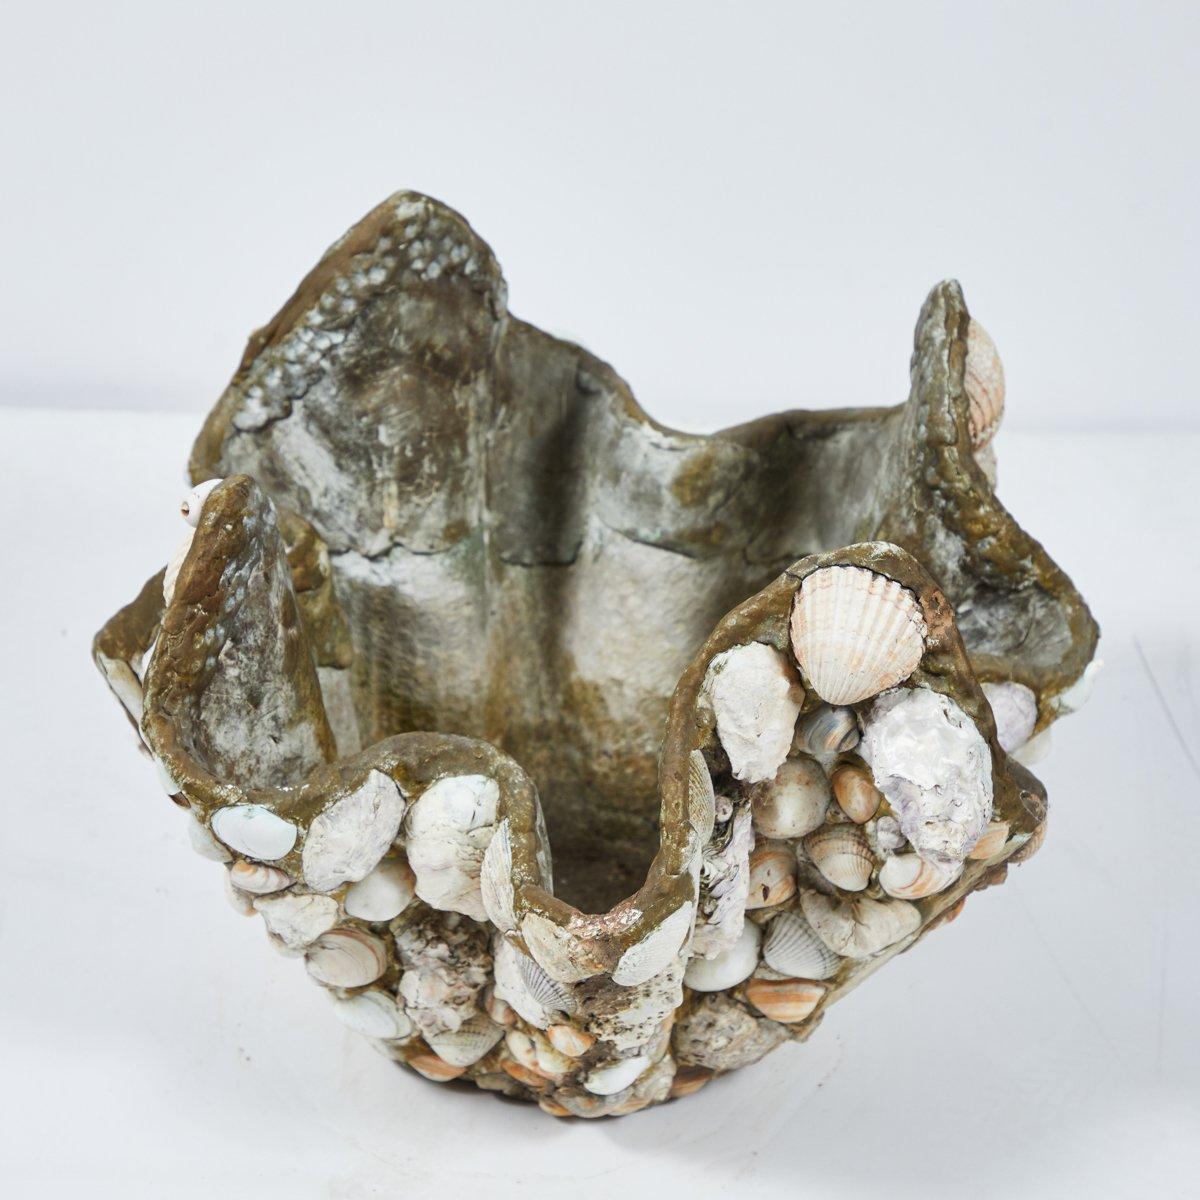 A pot with shells.